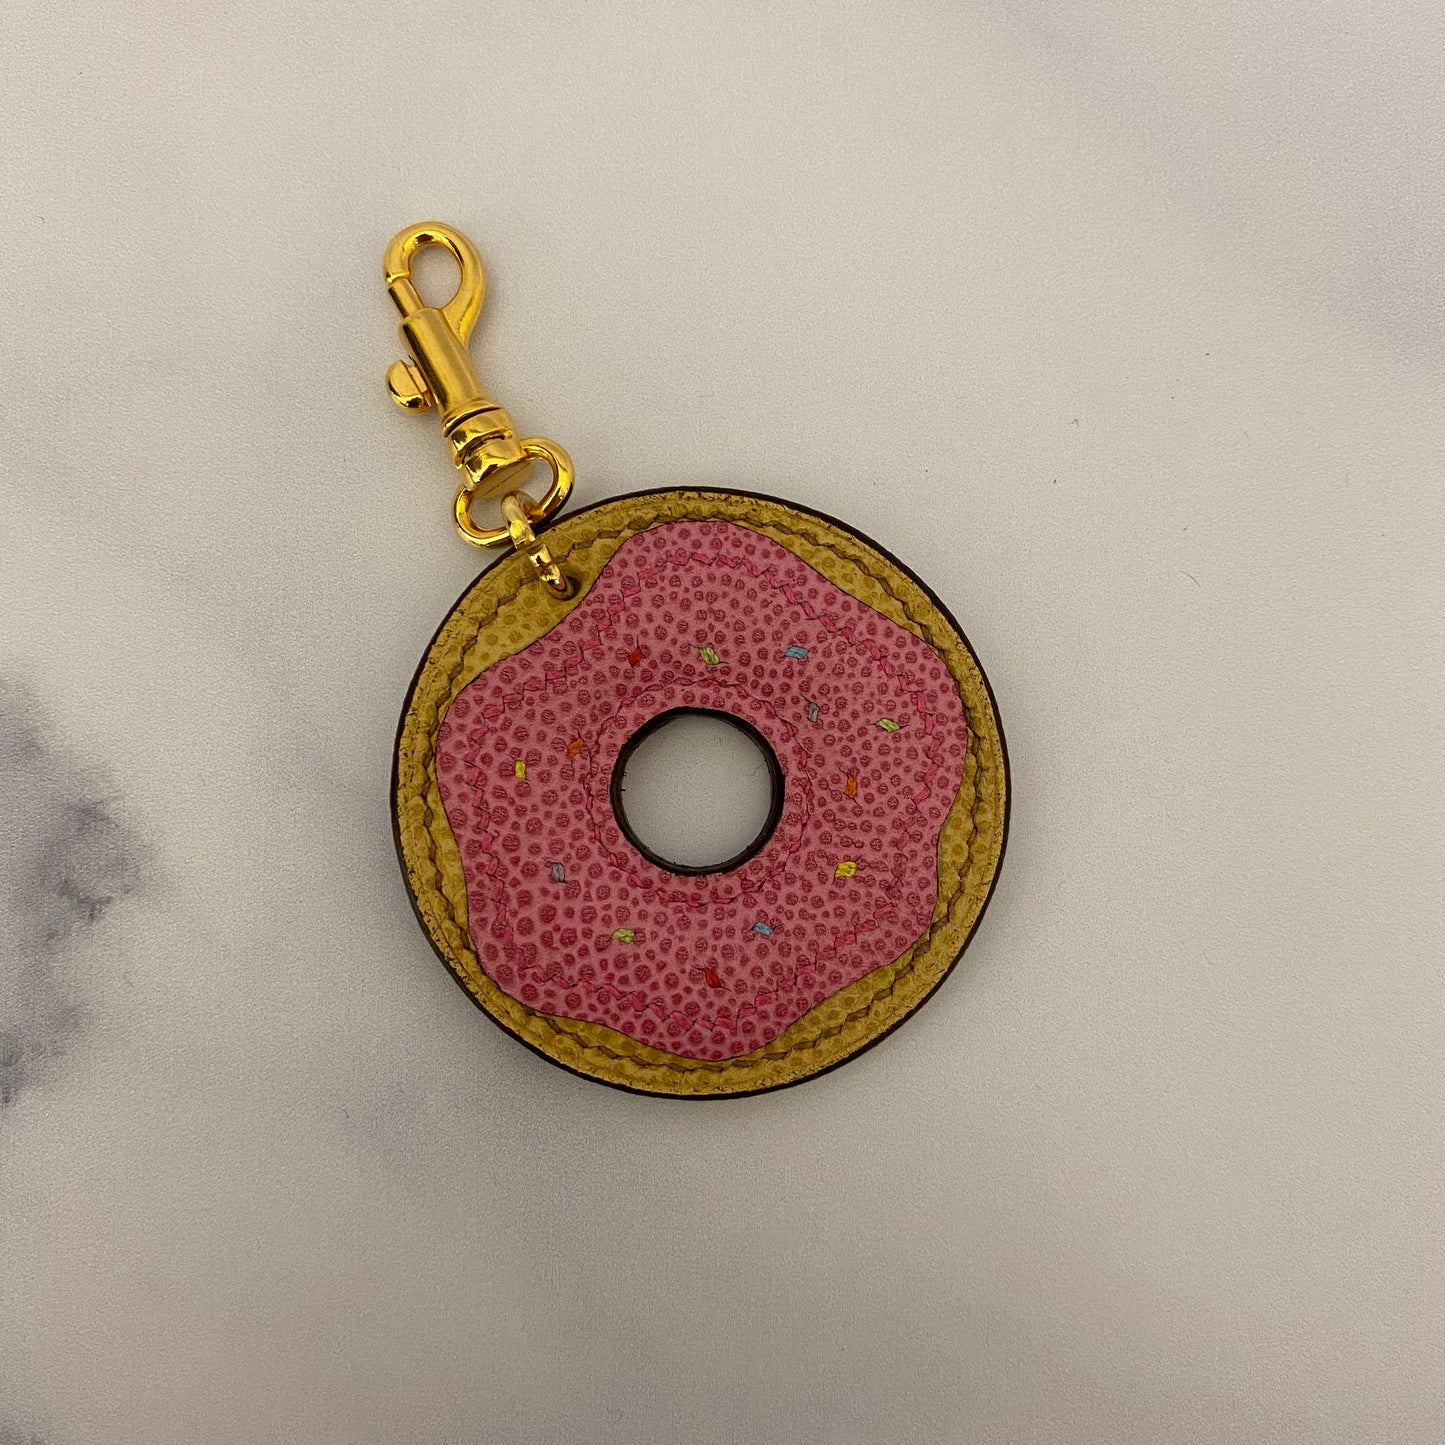 Pastry Keychain / Purse Charm